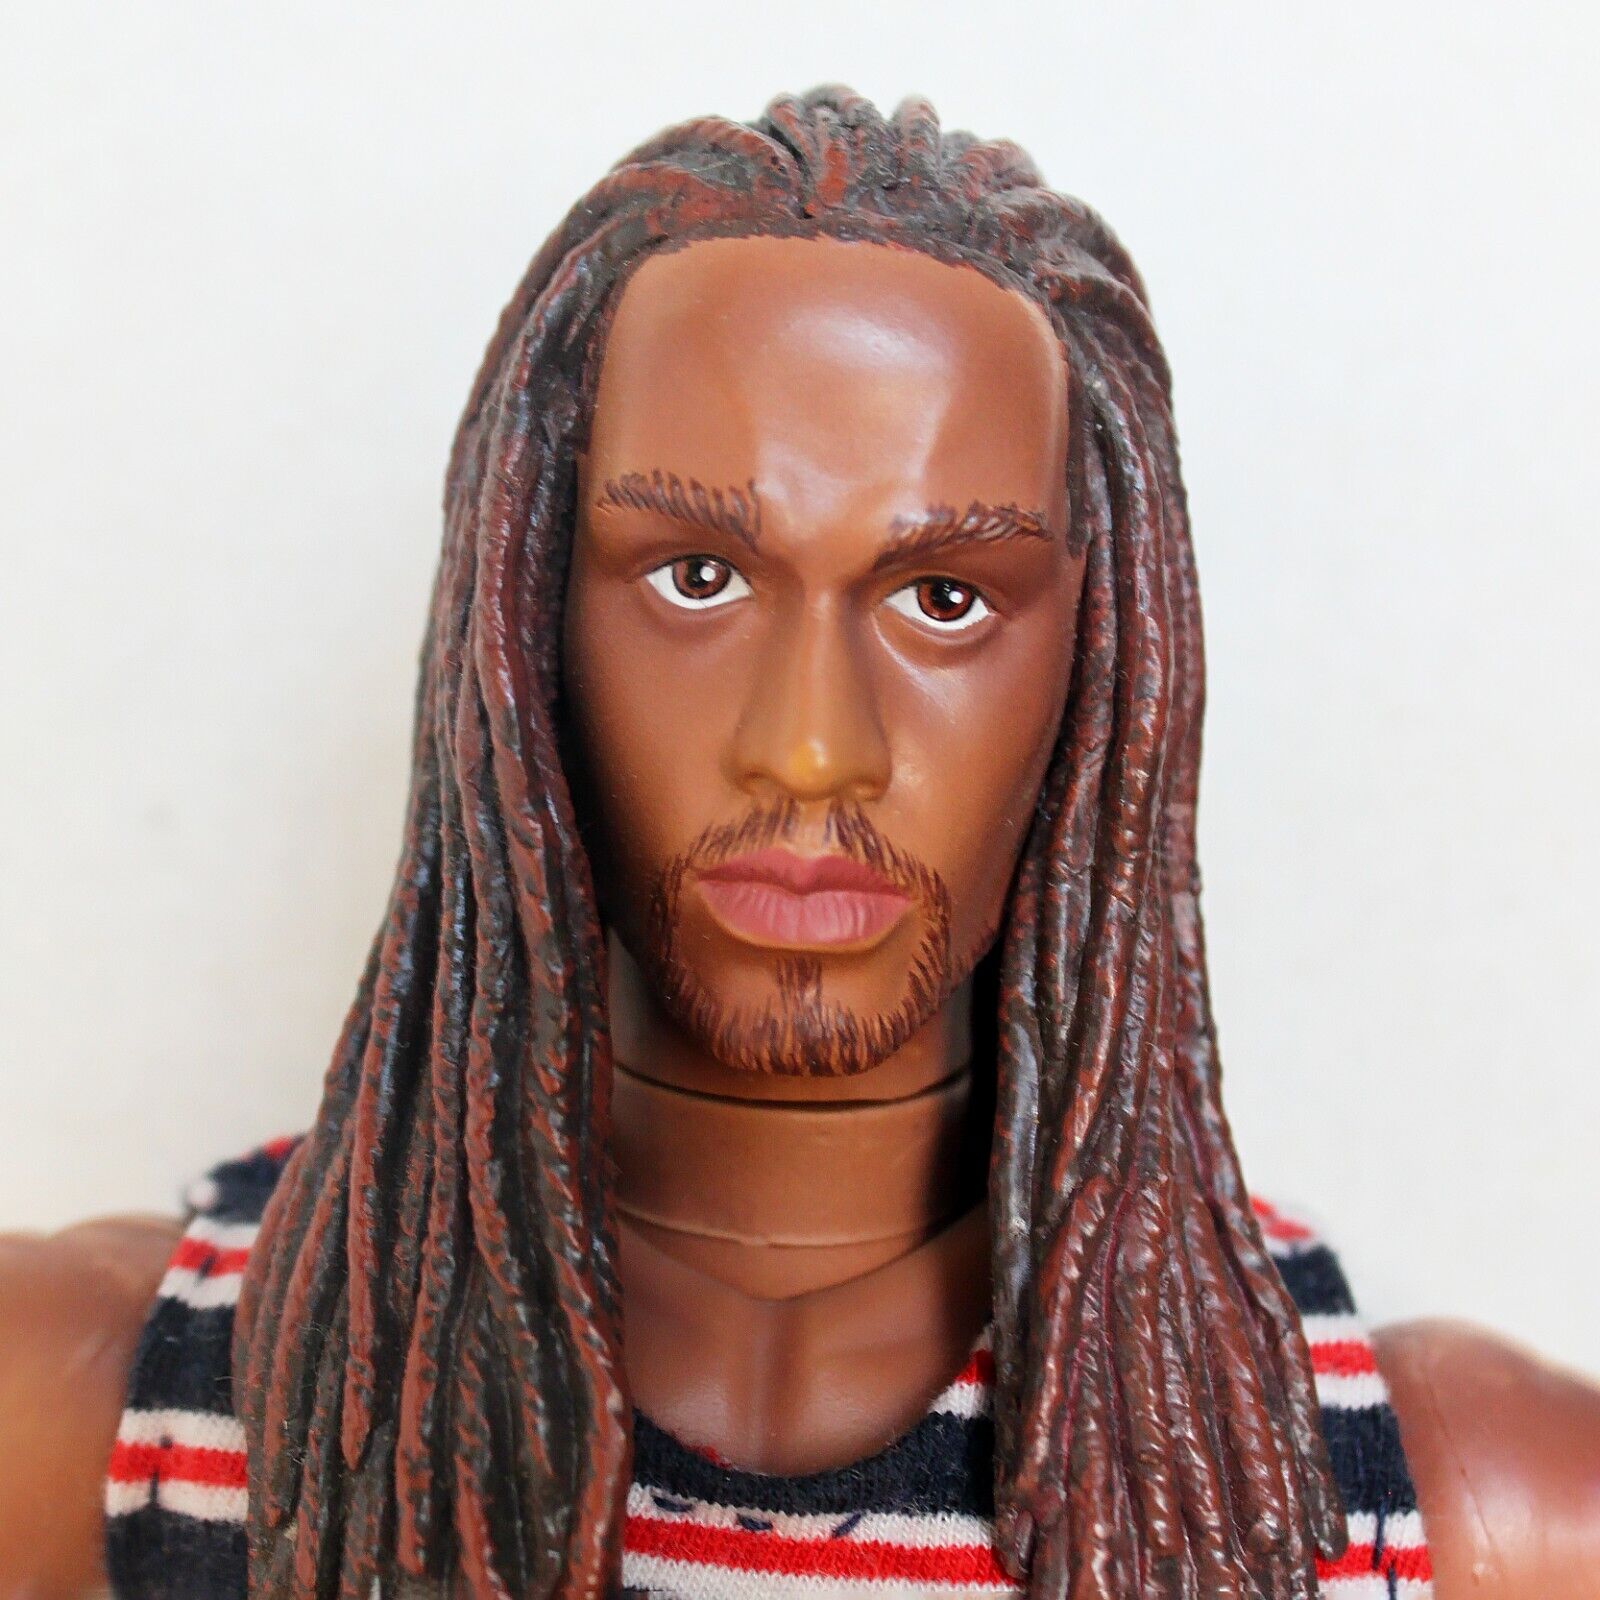 African American Male Doll in Handmade Unique Style Articulated Legs Rare